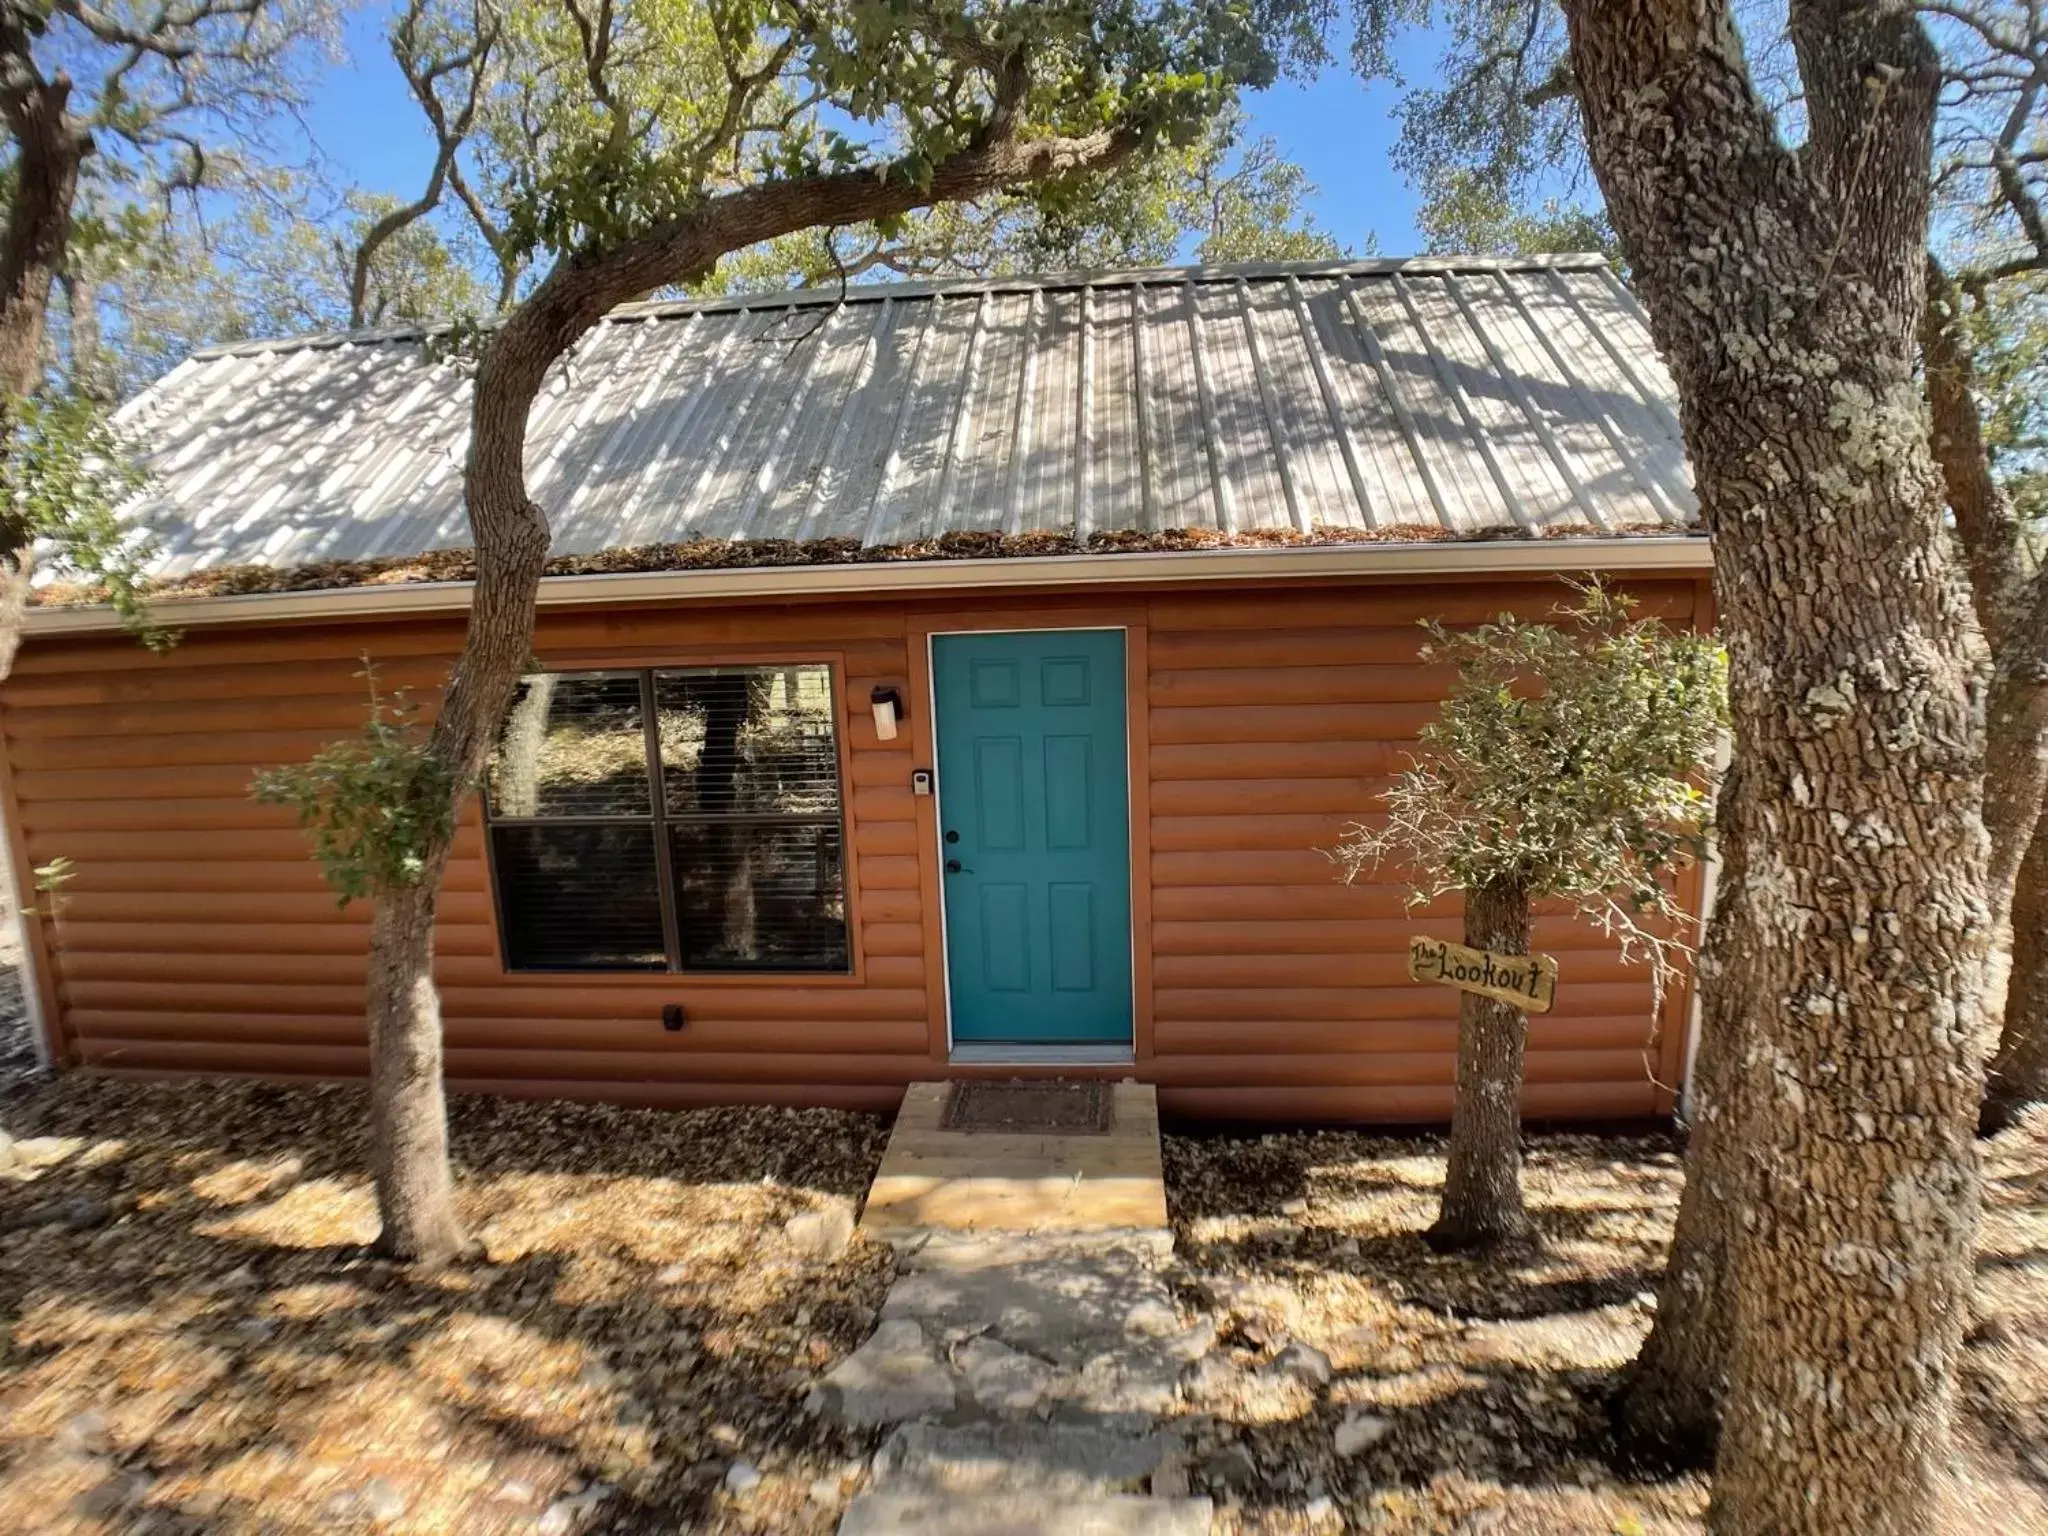 Property Building in Walnut Canyon Cabins